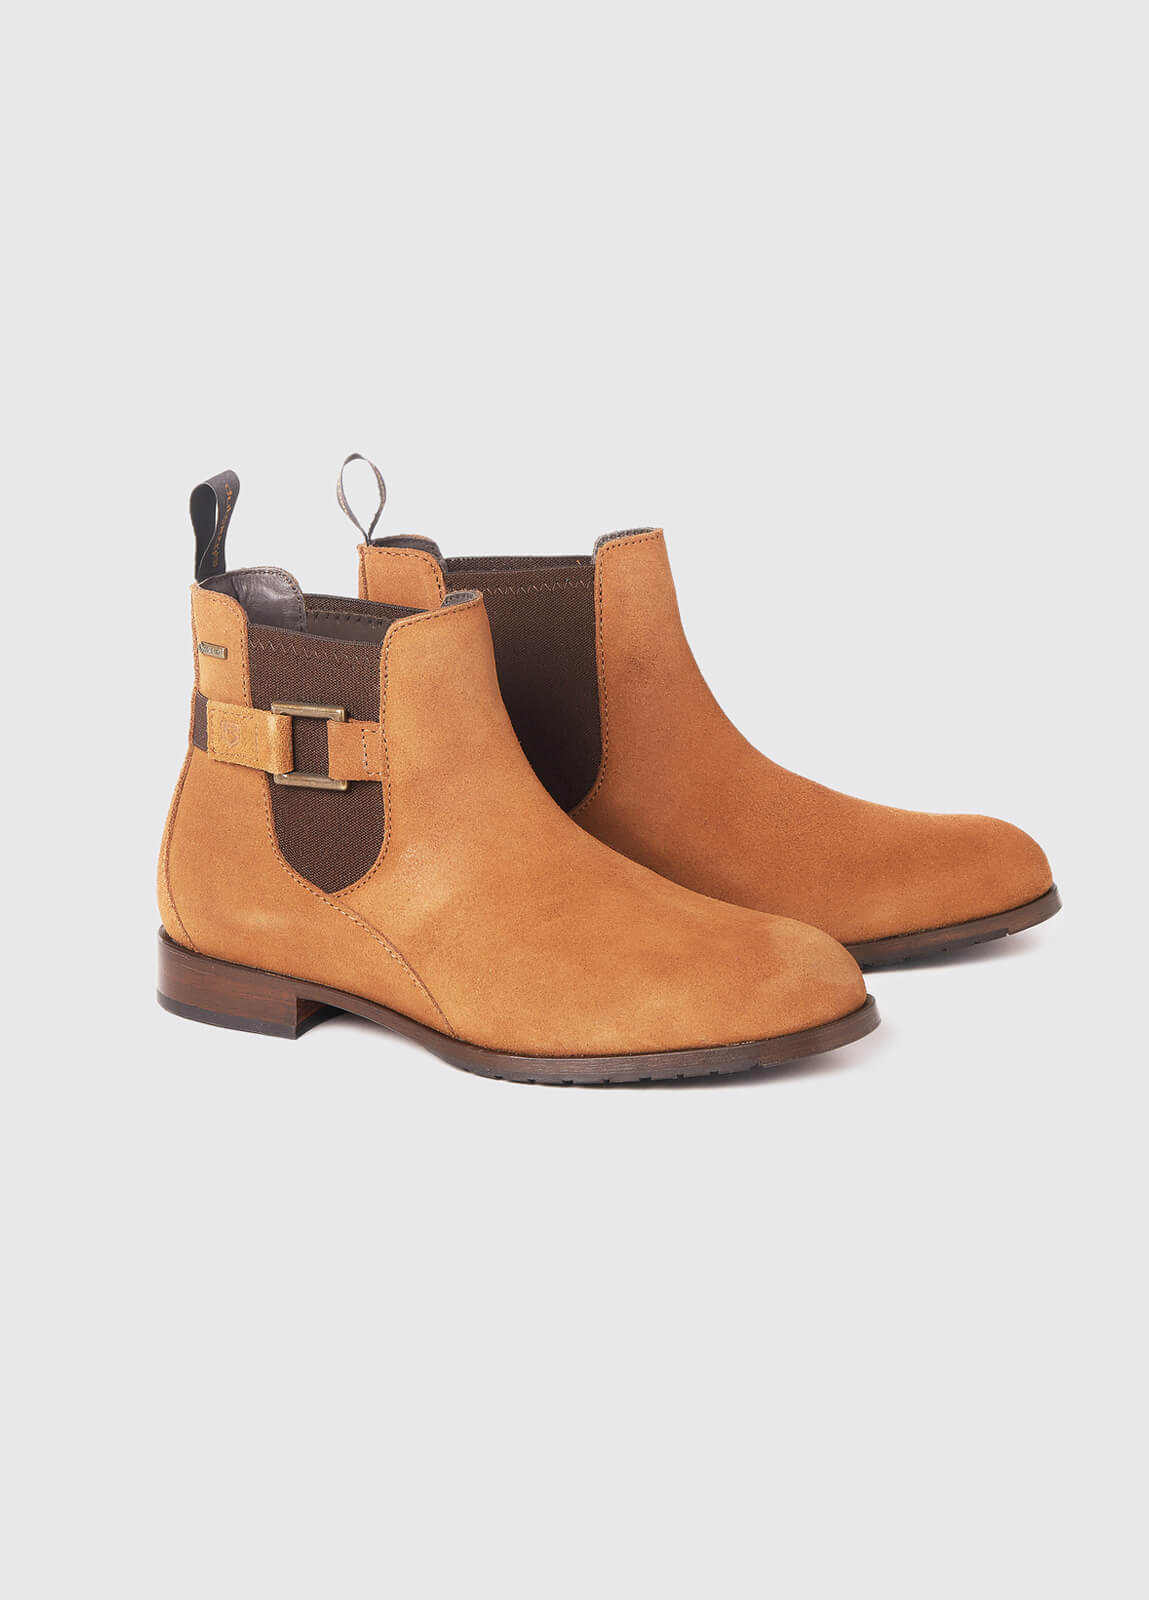 Monaghan Leather Soled Boot - Camel